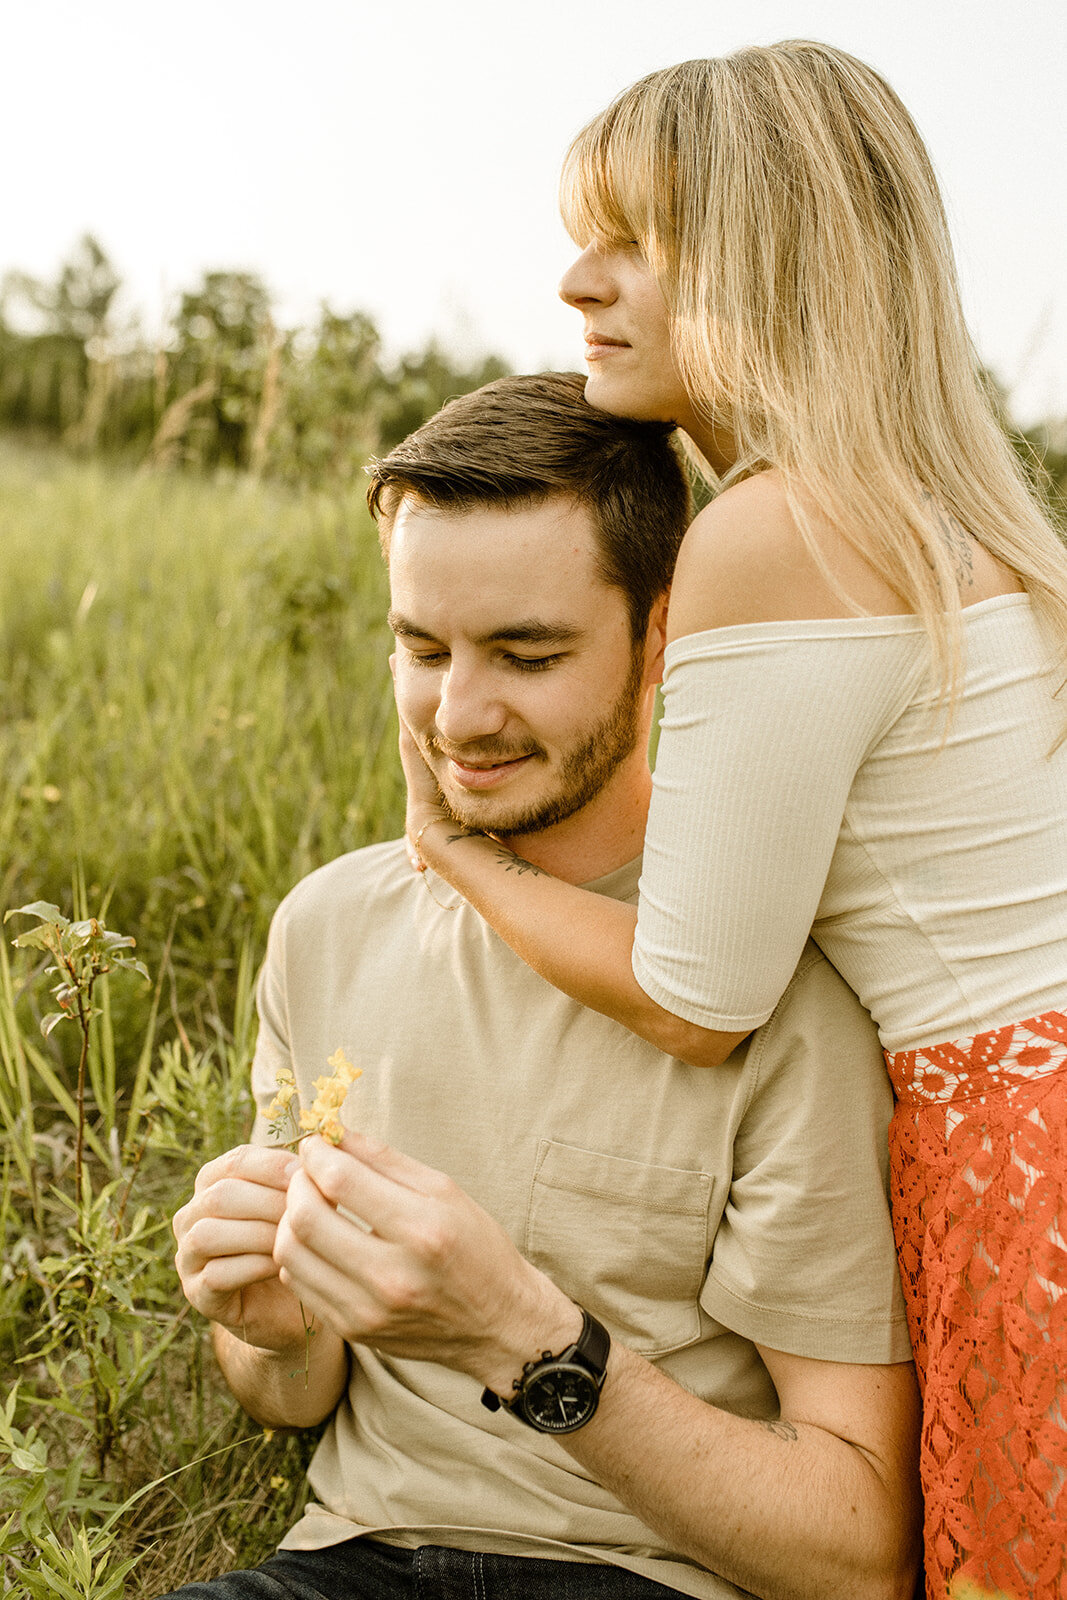 country-cut-flowers-summer-engagement-session-fun-romantic-indie-movie-wanderlust-328